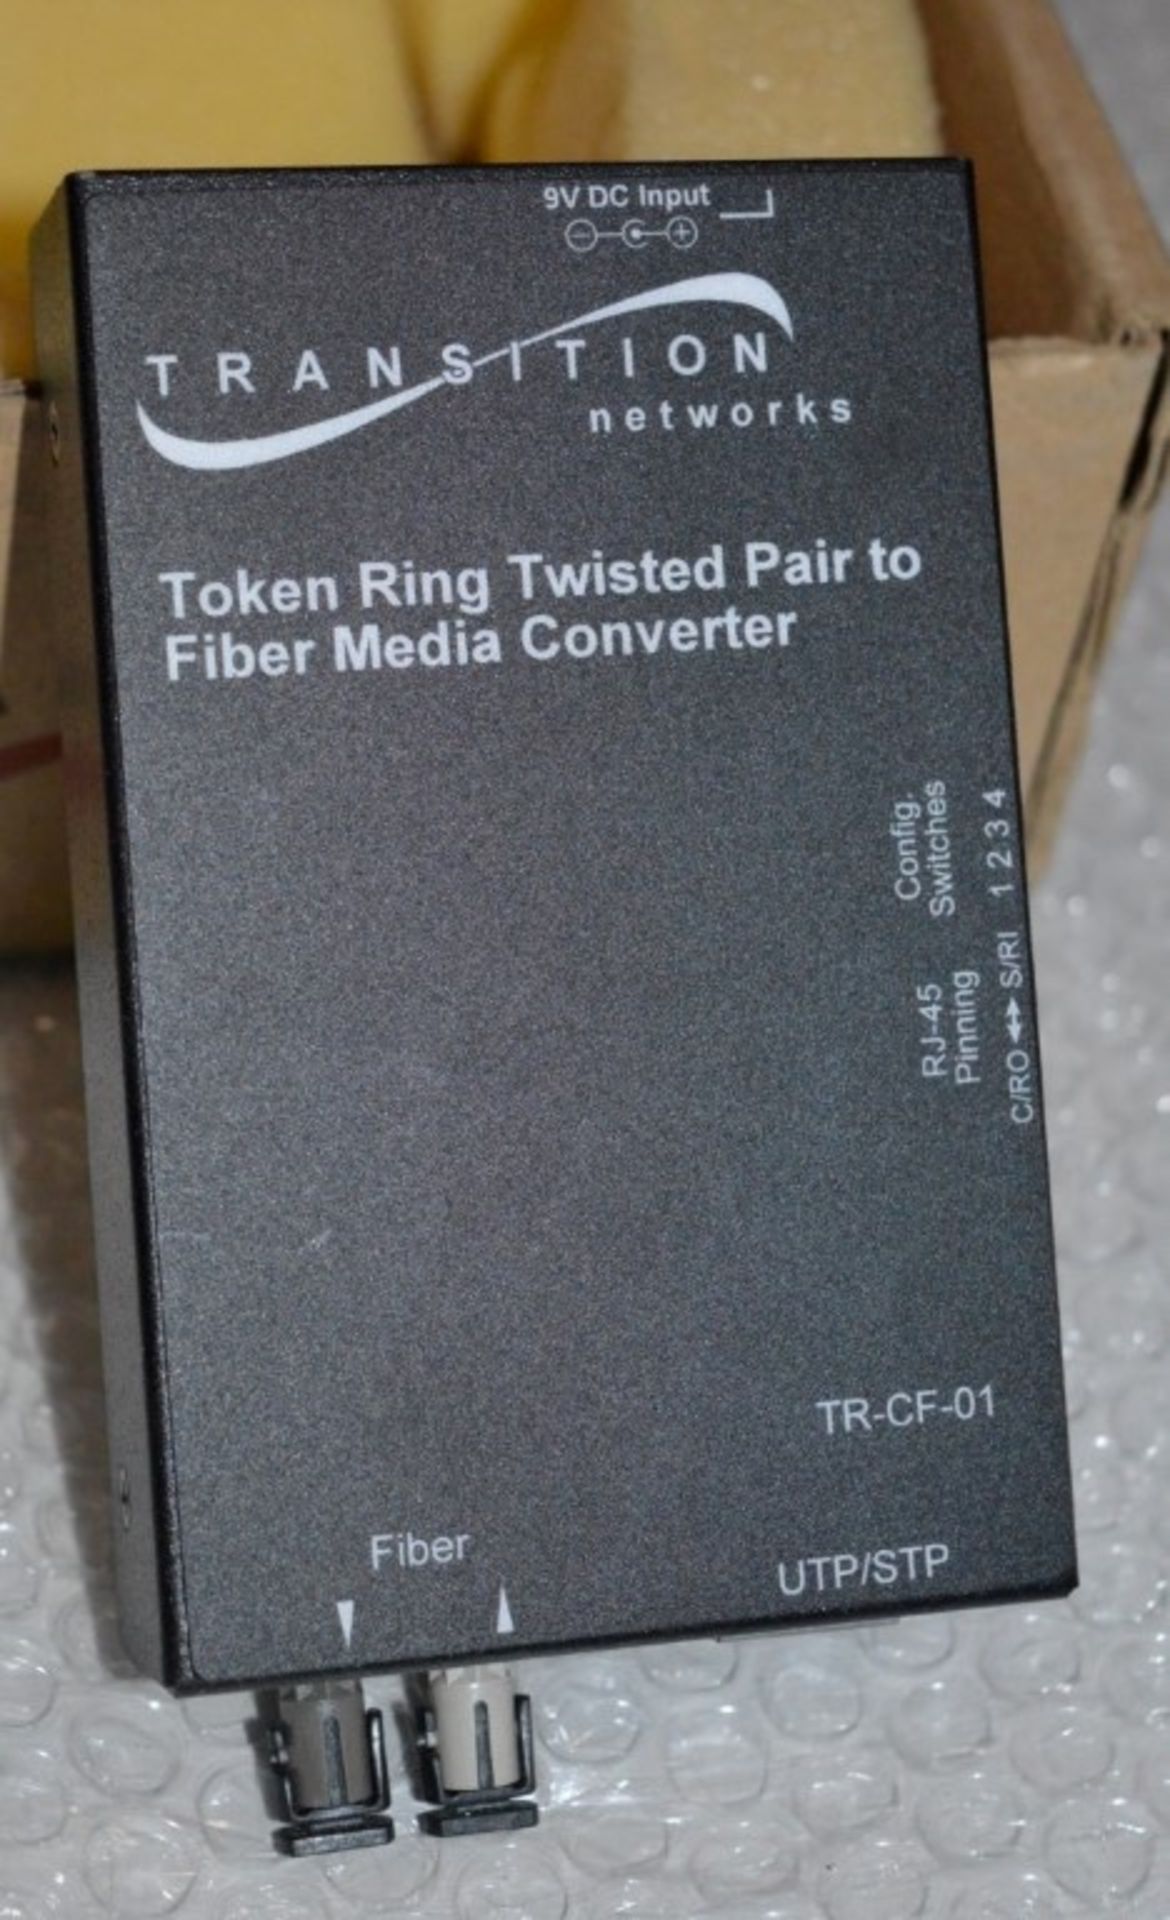 1 Transition Networks Token Ring Twisted Pair- Fiber Media Converter TR-CF-01 - Boxed With AC - Image 3 of 12